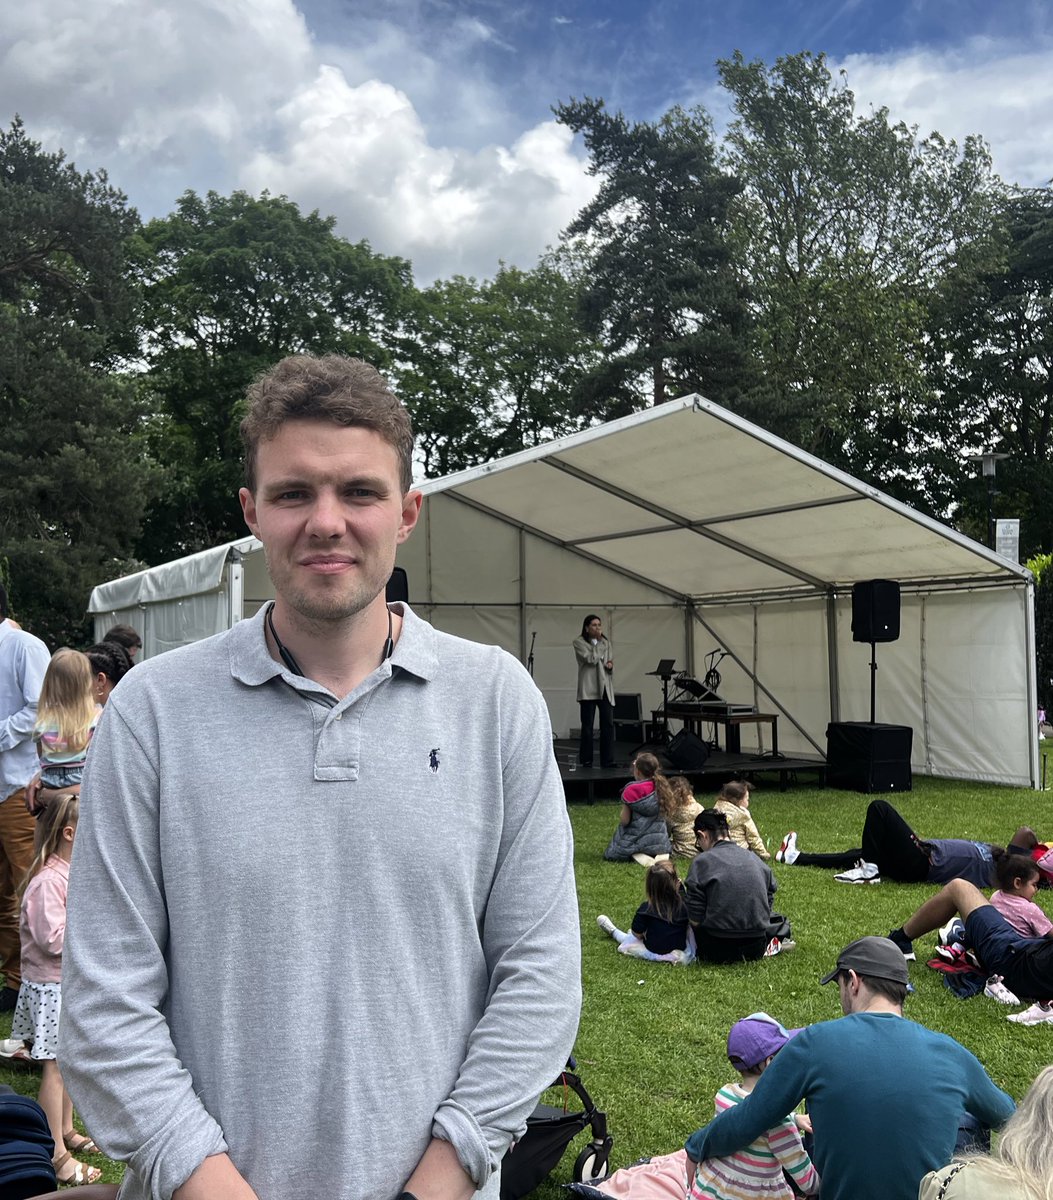 Loved getting along to Parkfest at Well Hall Pleasuance today. Great to see so many people out enjoying themselves. Luckily we managed to miss the rain!